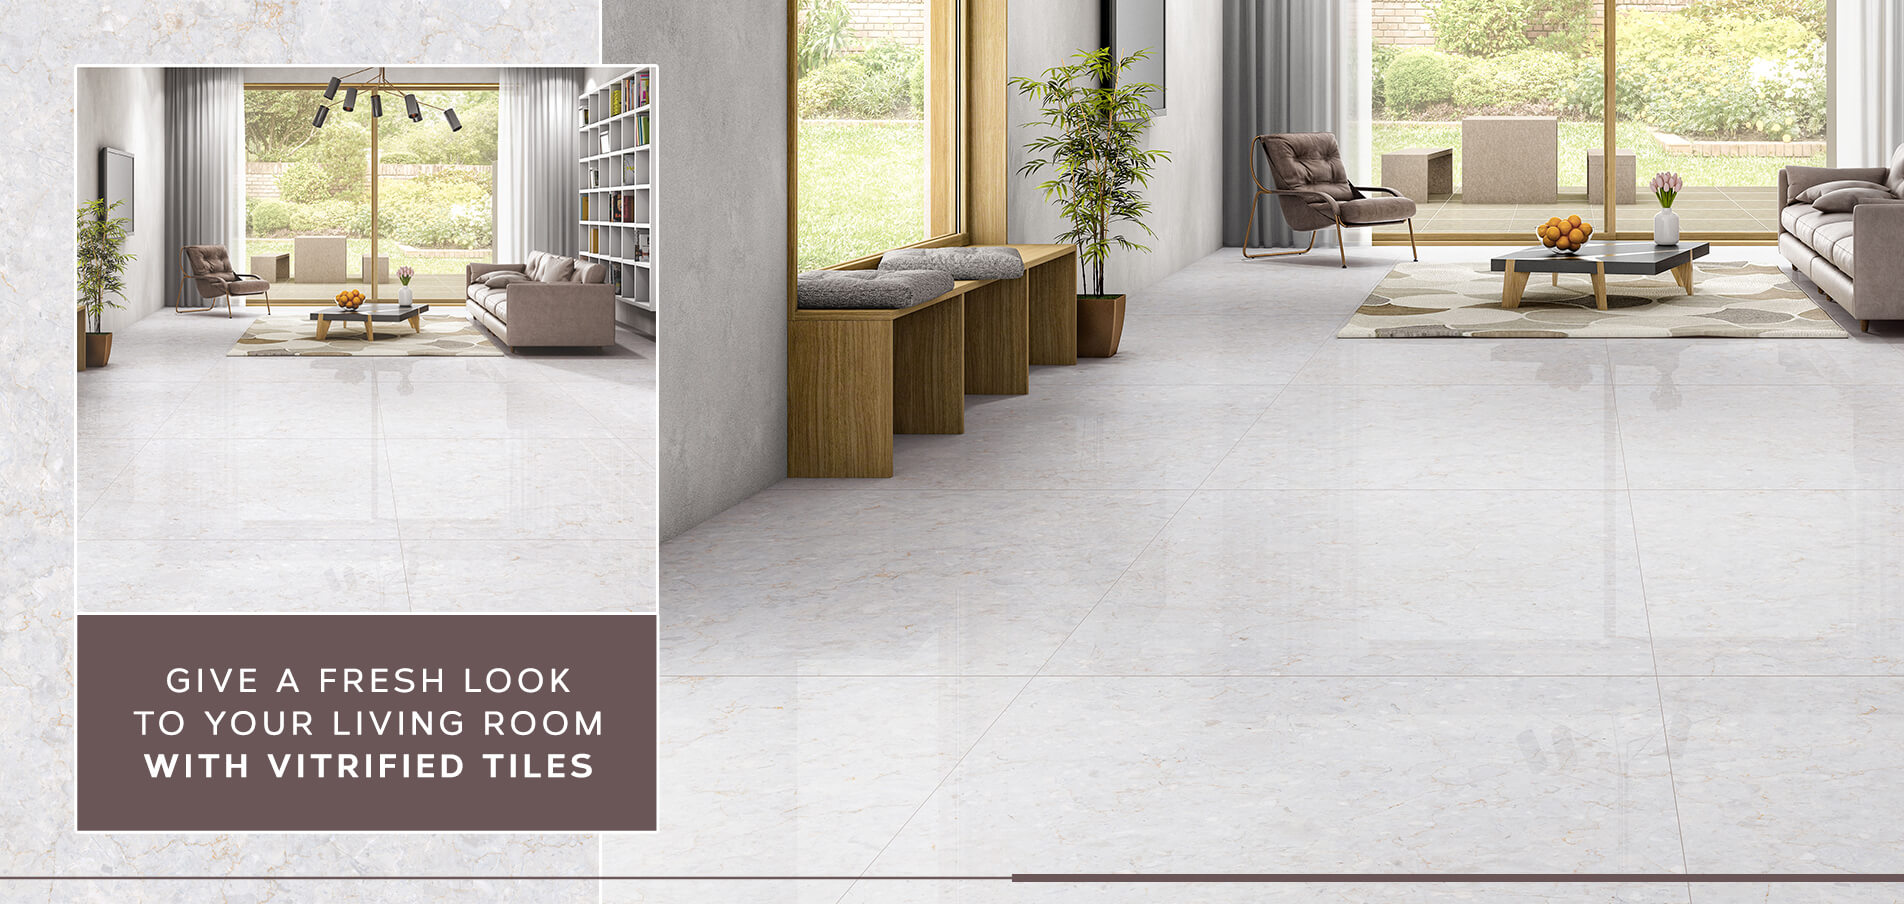 Give A Fresh Look To Your Living Room With Vitrified Tiles